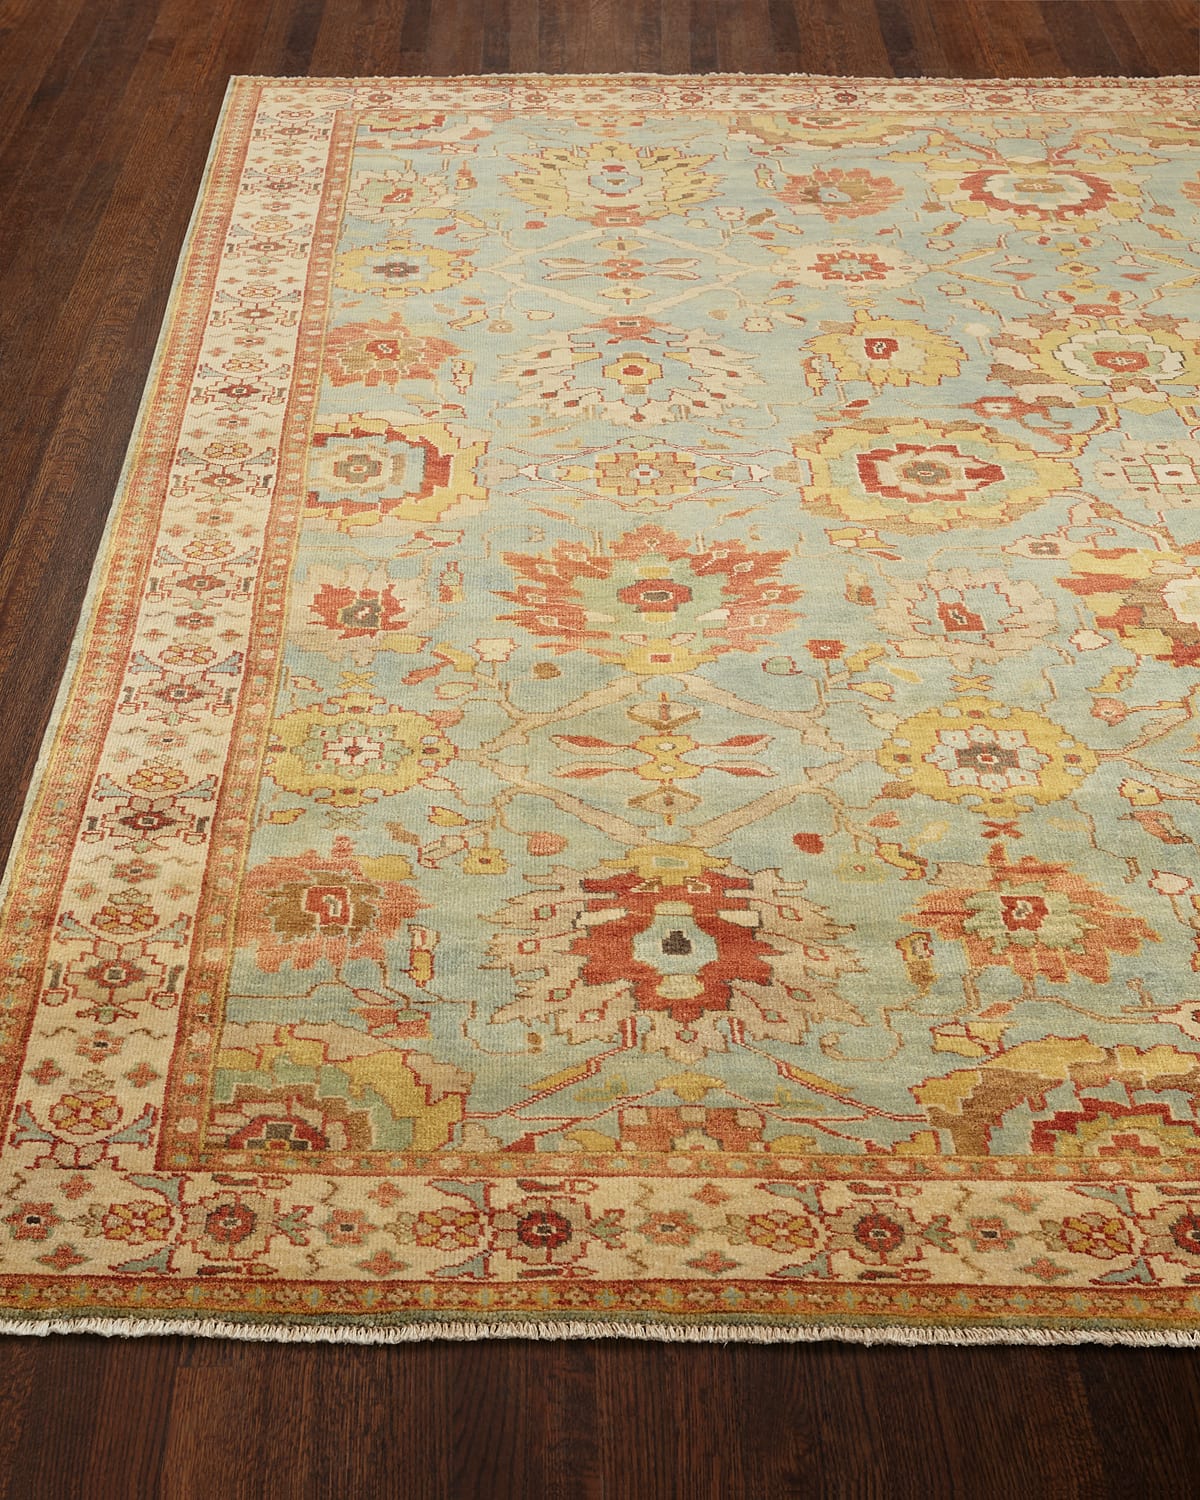 Oasis Antique Weave Knotted Rug, 12' x 15'